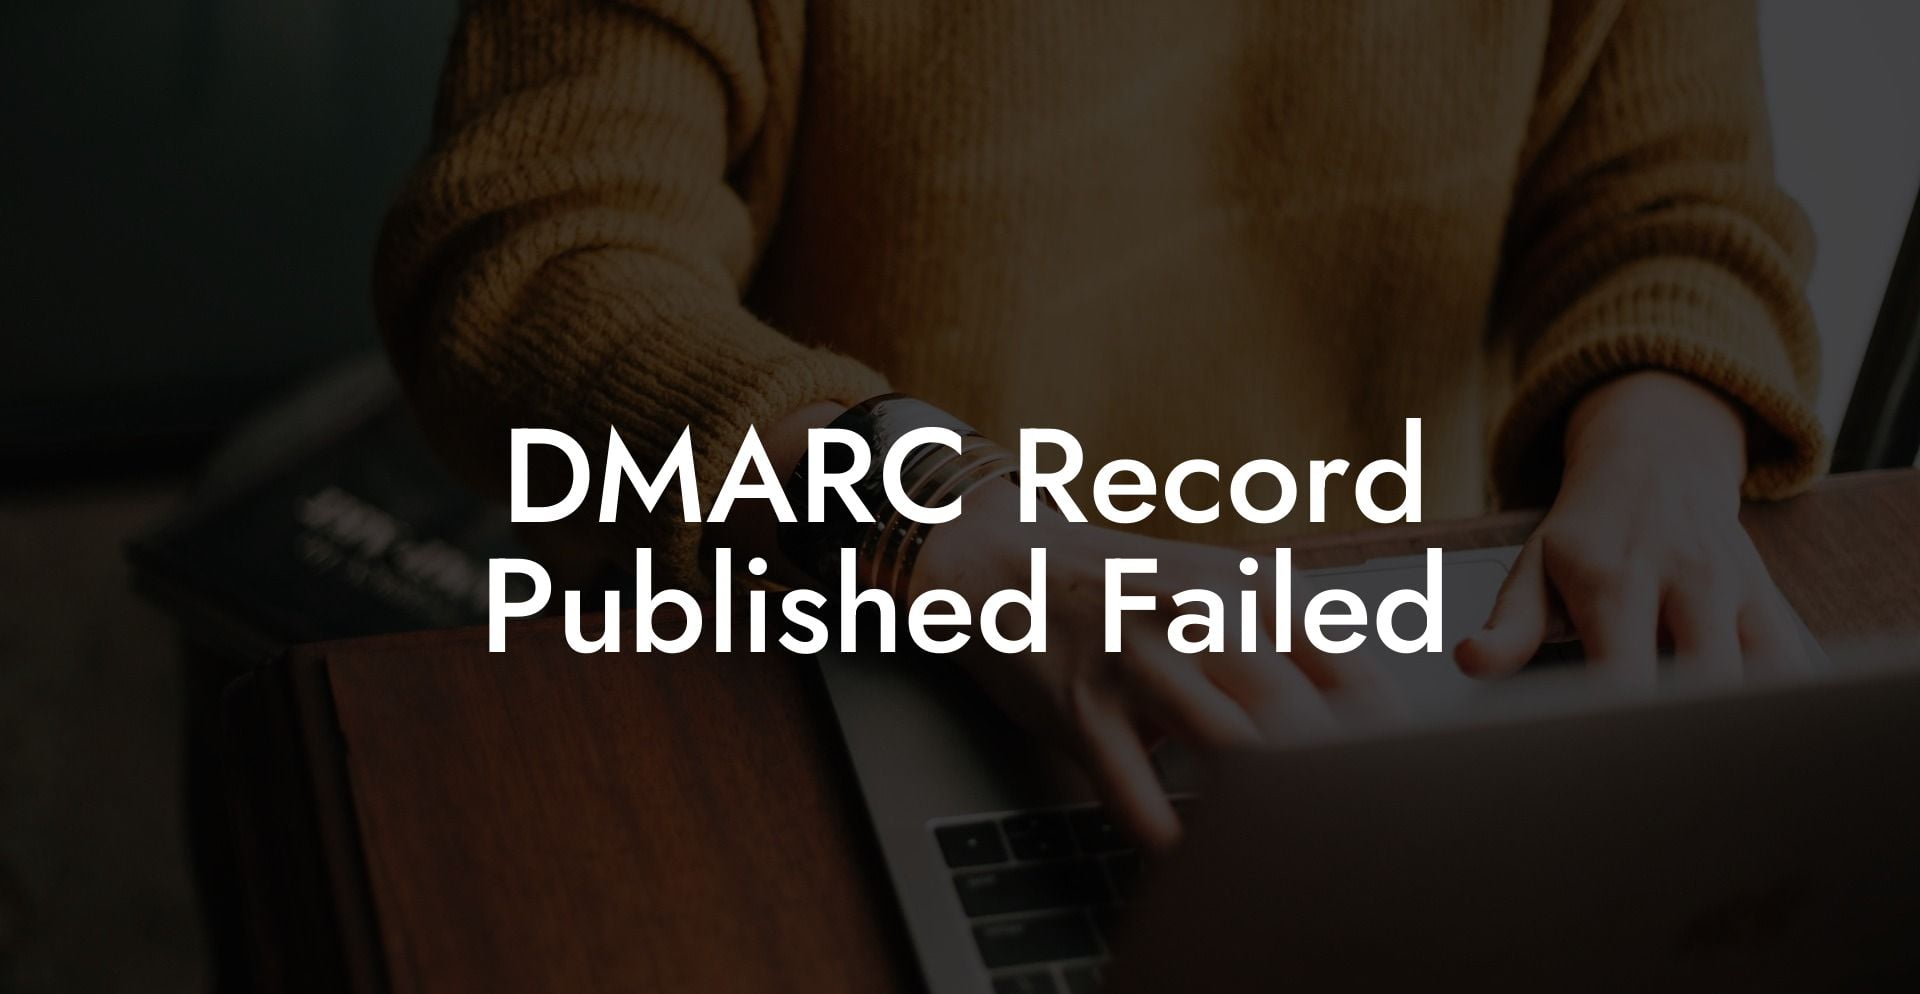 DMARC Record Published Failed